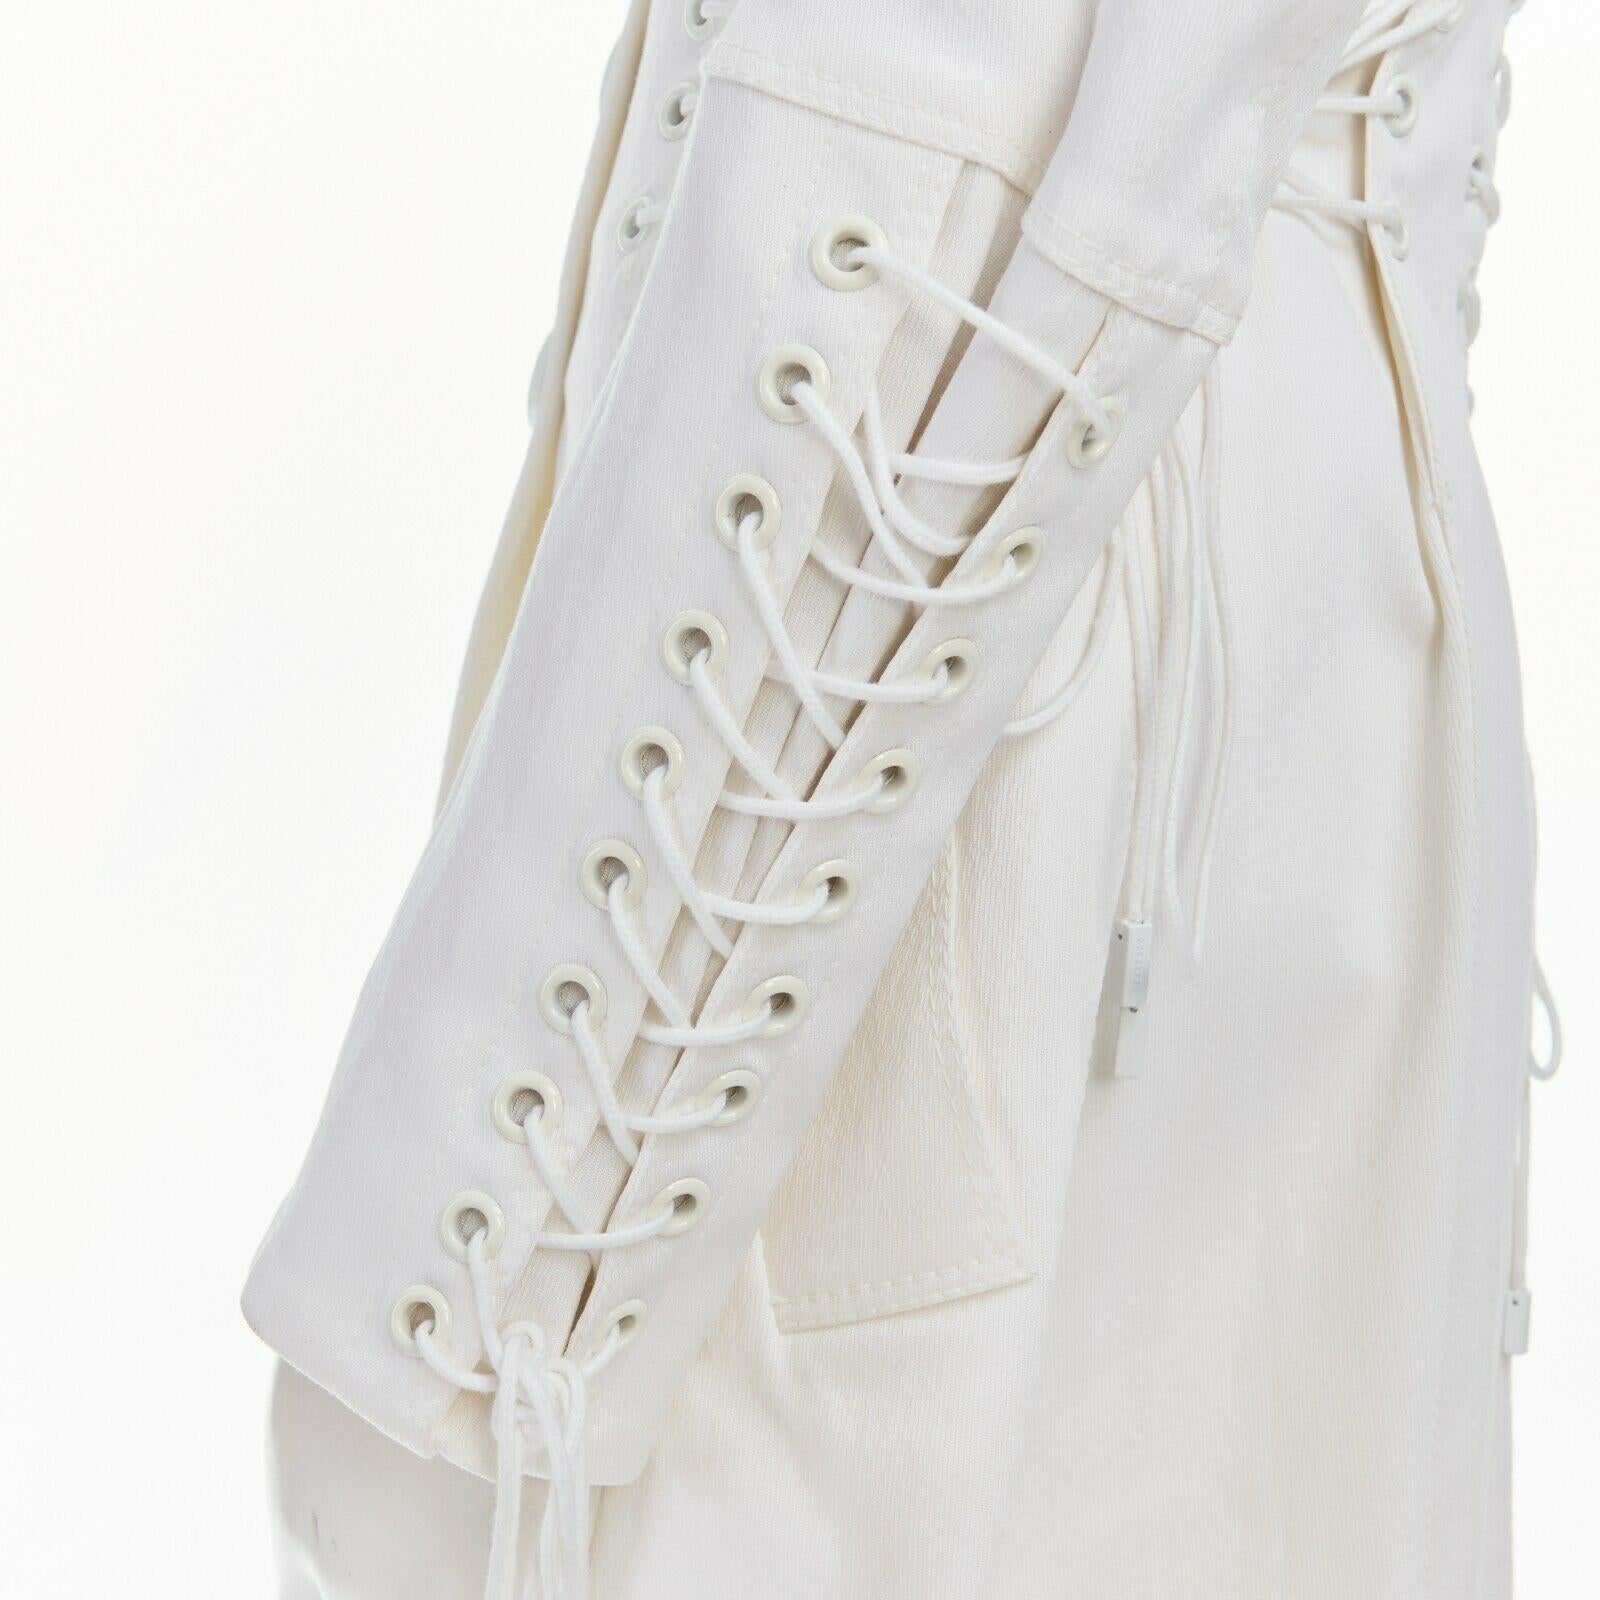 BURBERRY PRORSUM white corset lacing detail button front trench coat IT40 S
BURBERRY PRORSUM
Viscose, lace. 
White. 
Spread collar. 
Button front closure. 
Enlarged tonal button with Burberry branding. 
Corset-inspired lace detailing. 
Dual button